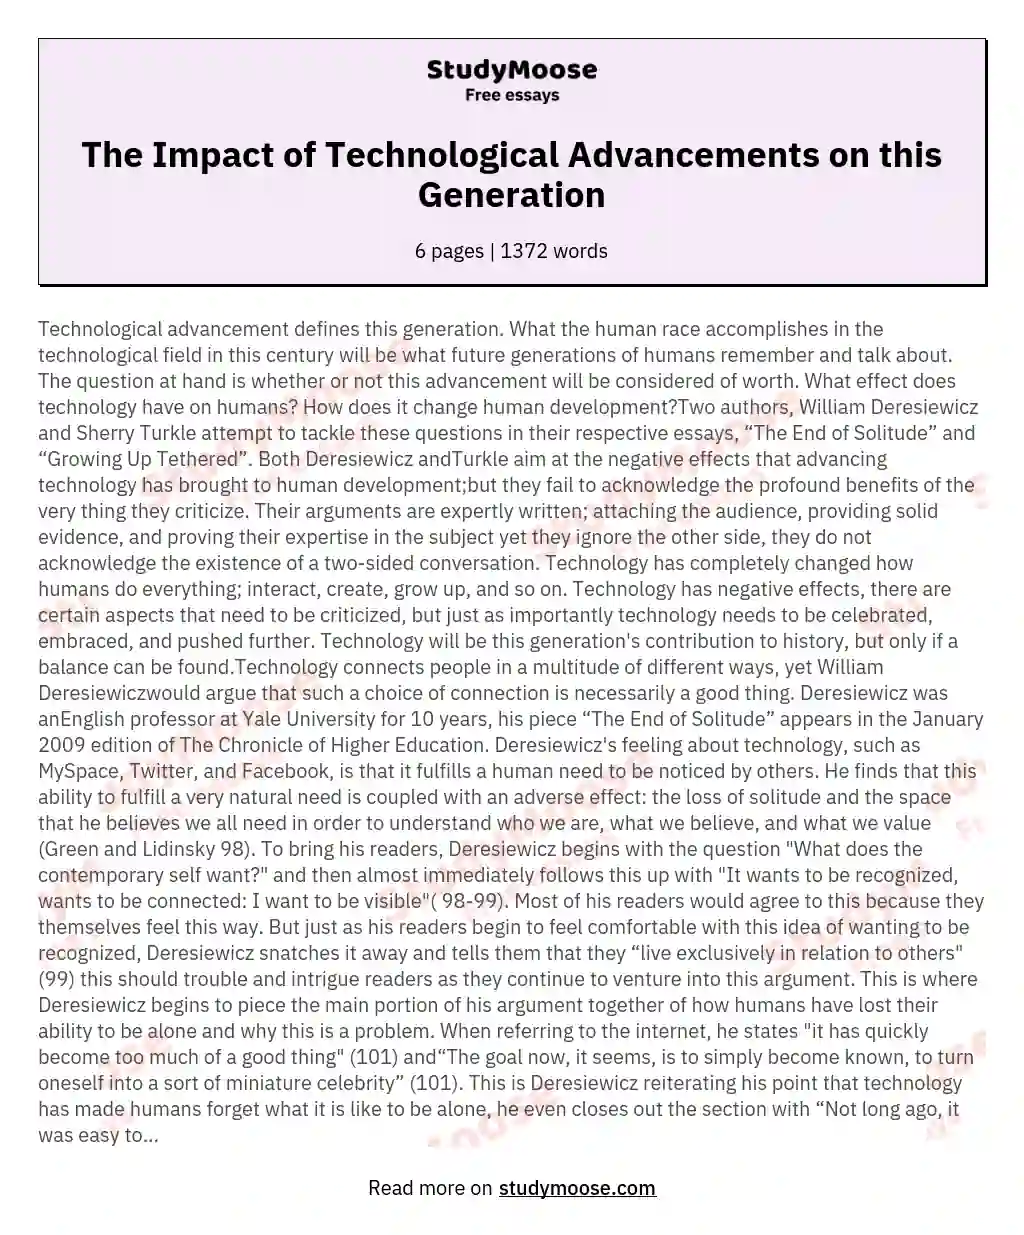 The Impact of Technological Advancements on this Generation essay